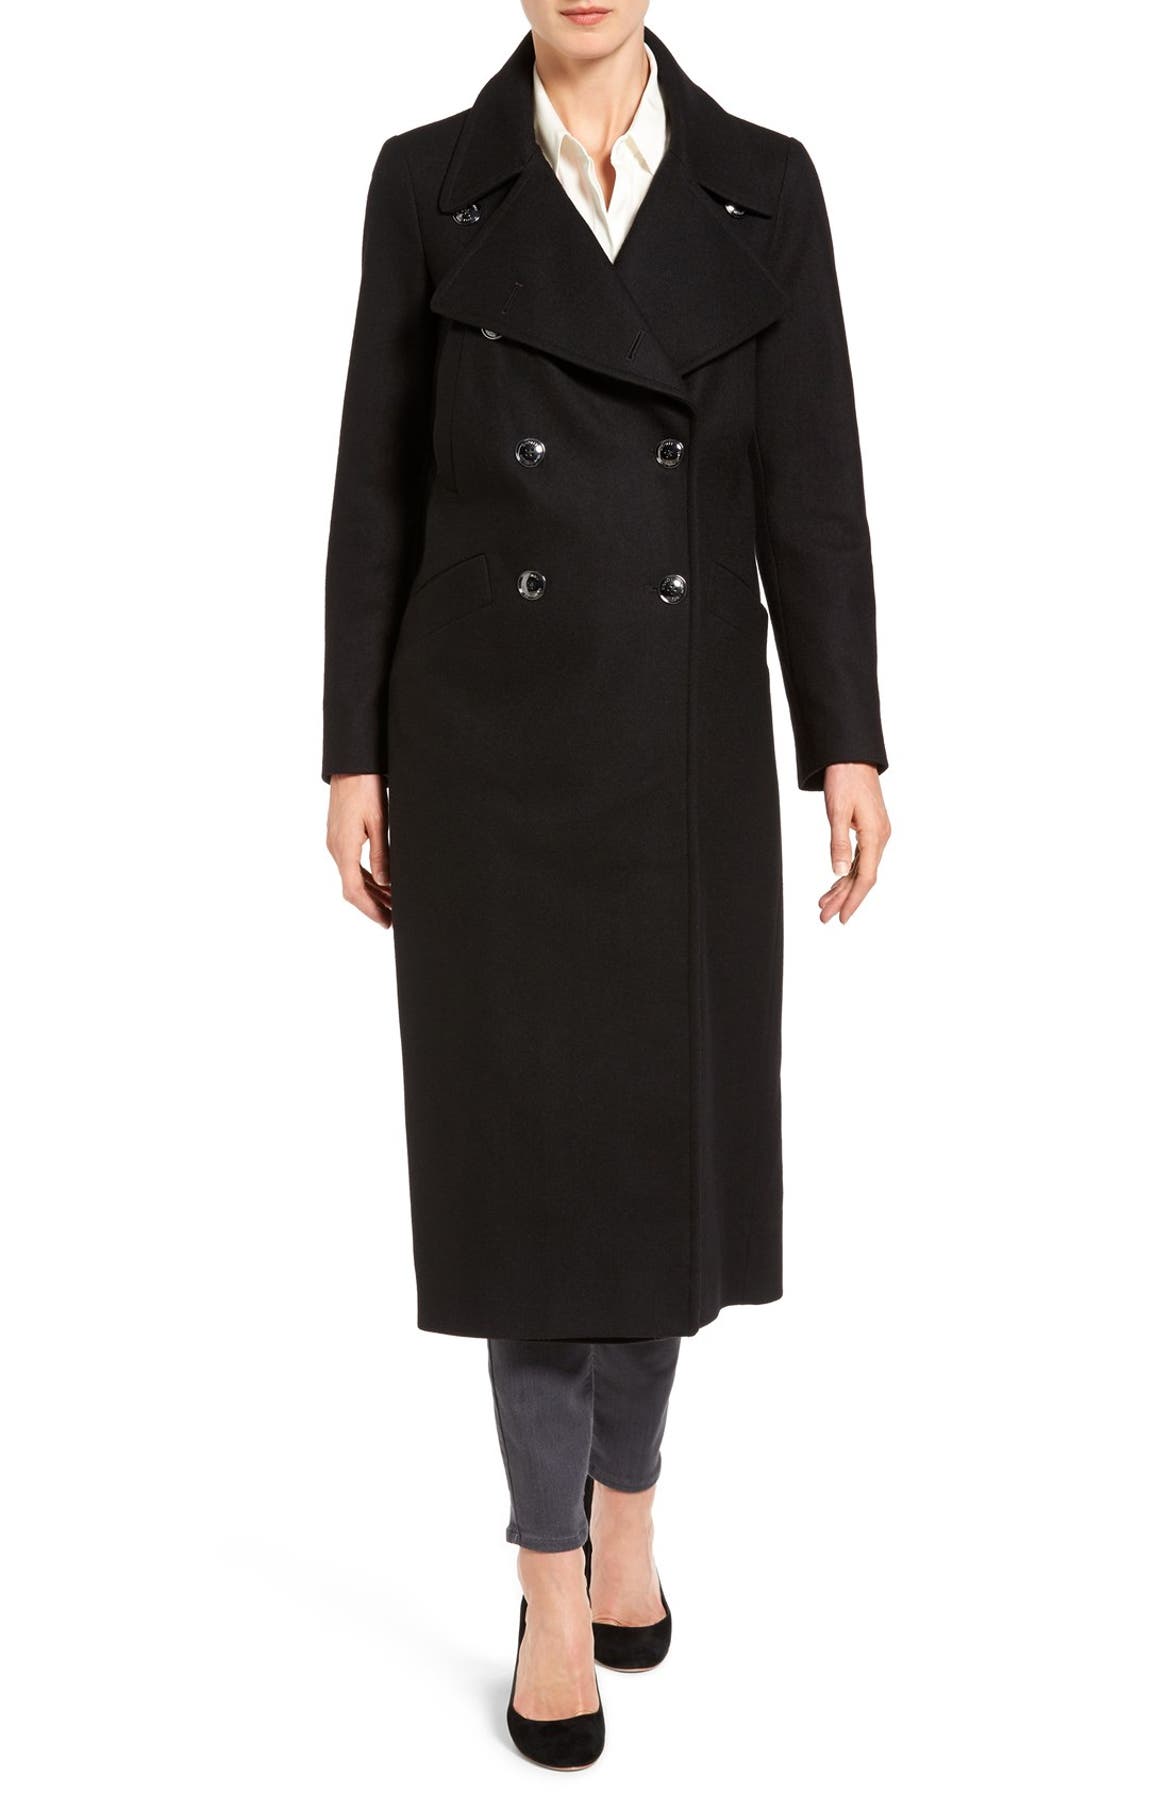 MICHAEL Michael Kors Maxi Double Breasted Wool Blend Coat | Nordstrom